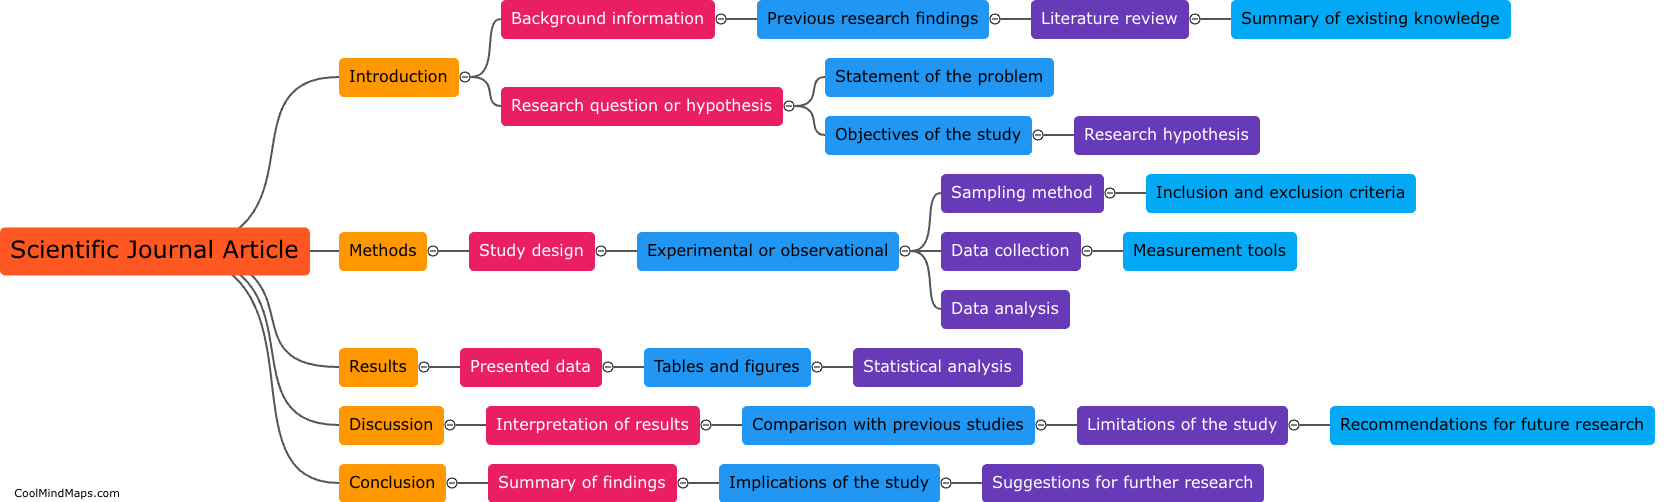 What is the structure of a scientific journal article?